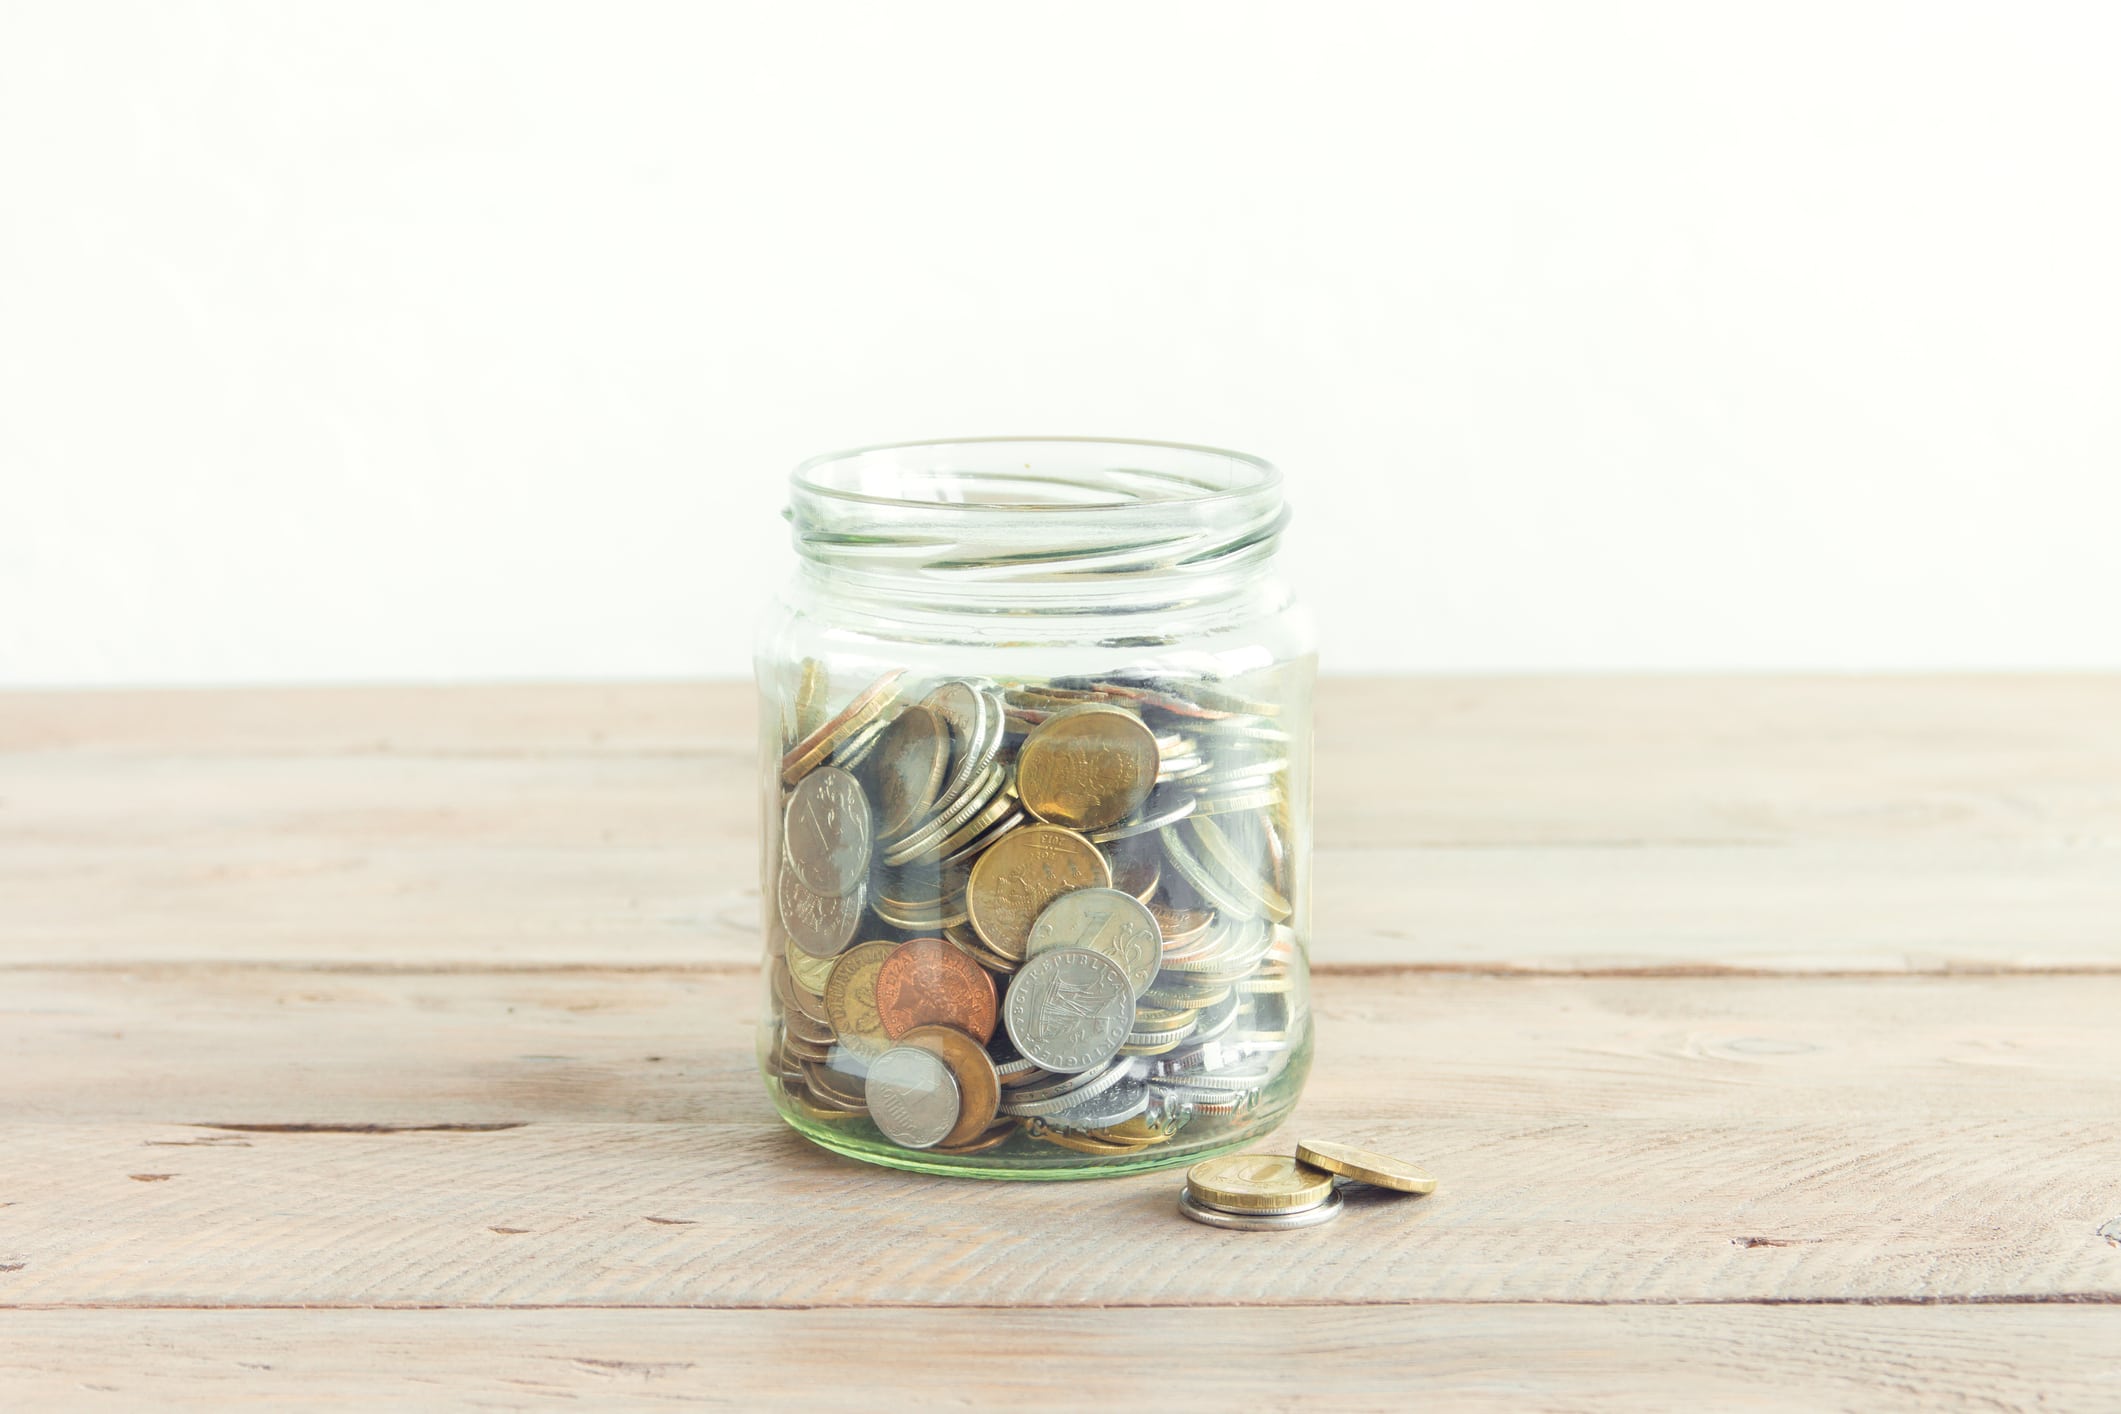 Coins in glass jar. Money savings concept. Jar with assorted coins on wooden table, copy space.